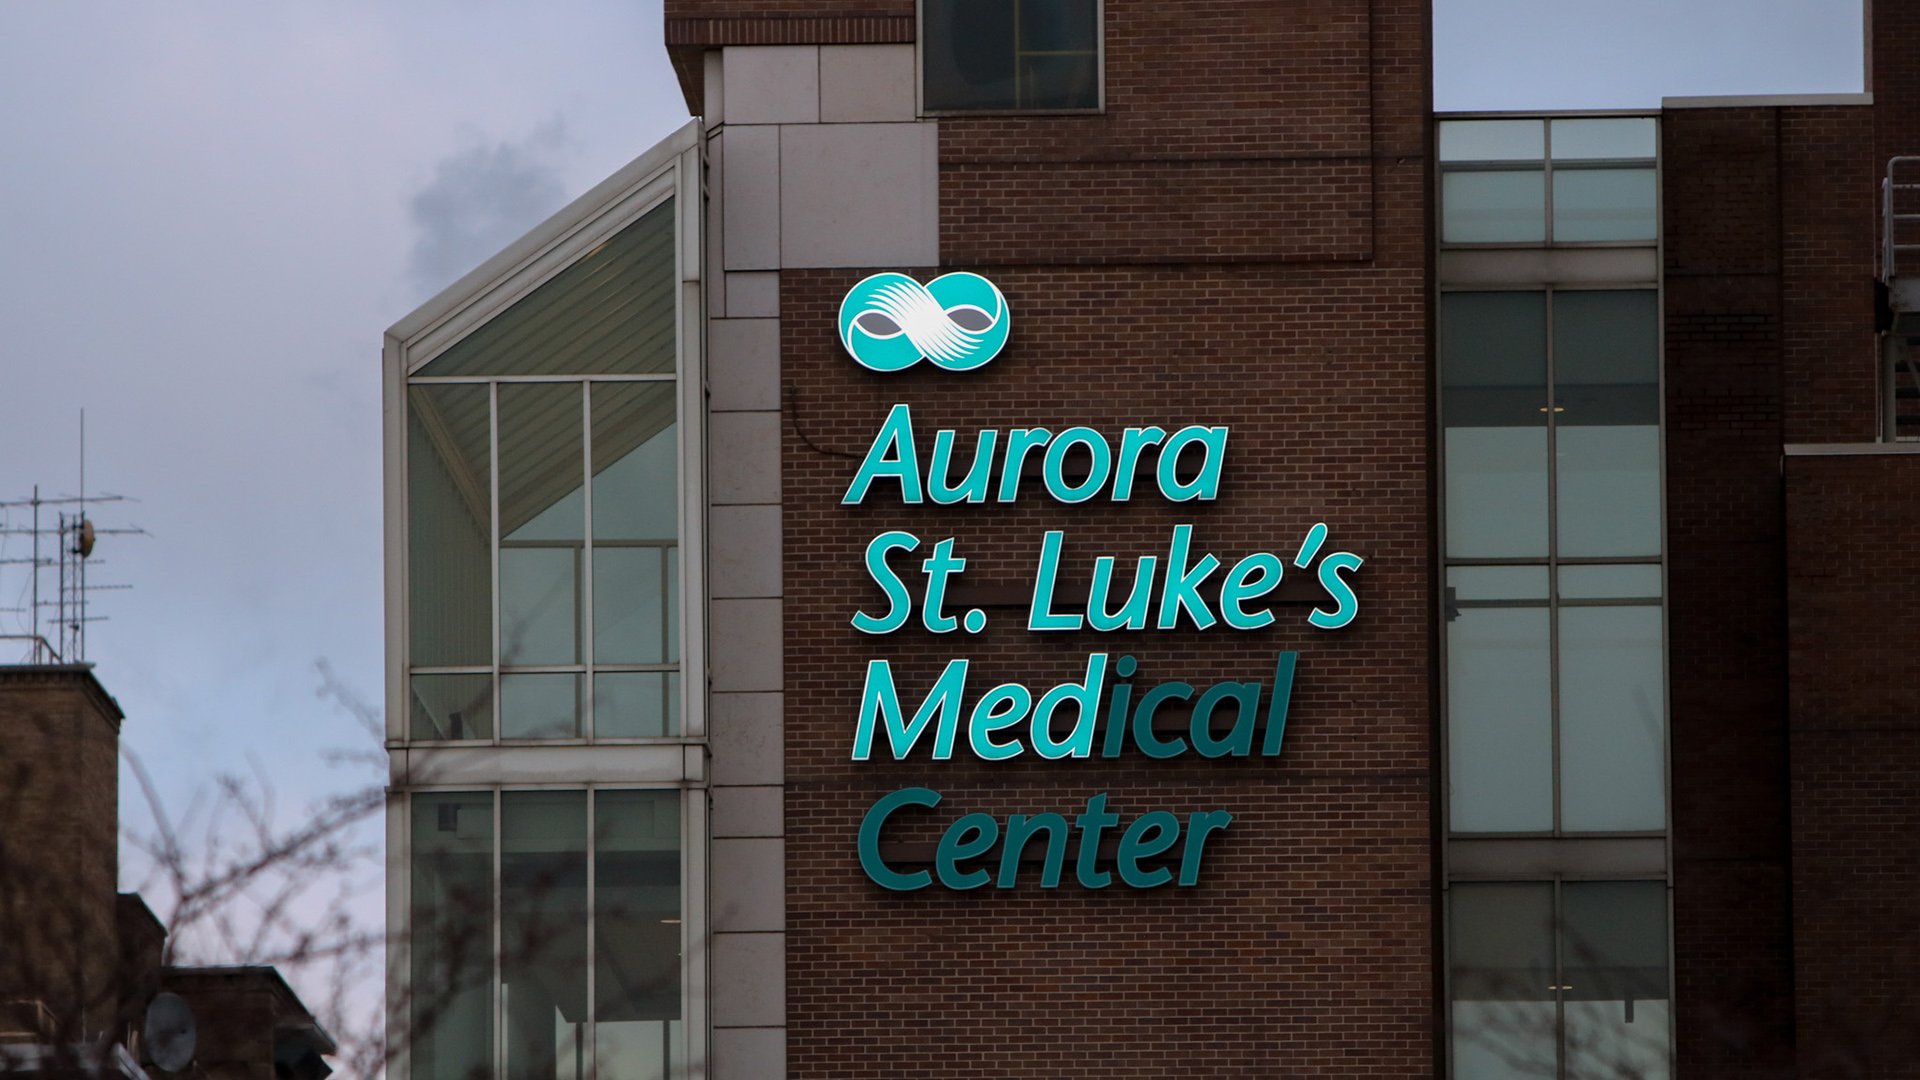 A multi-story building with glass-walled walkways and brick elevator shafts includes a letter sign near its roof that reads "Aurora St. Luke's Medical Center."